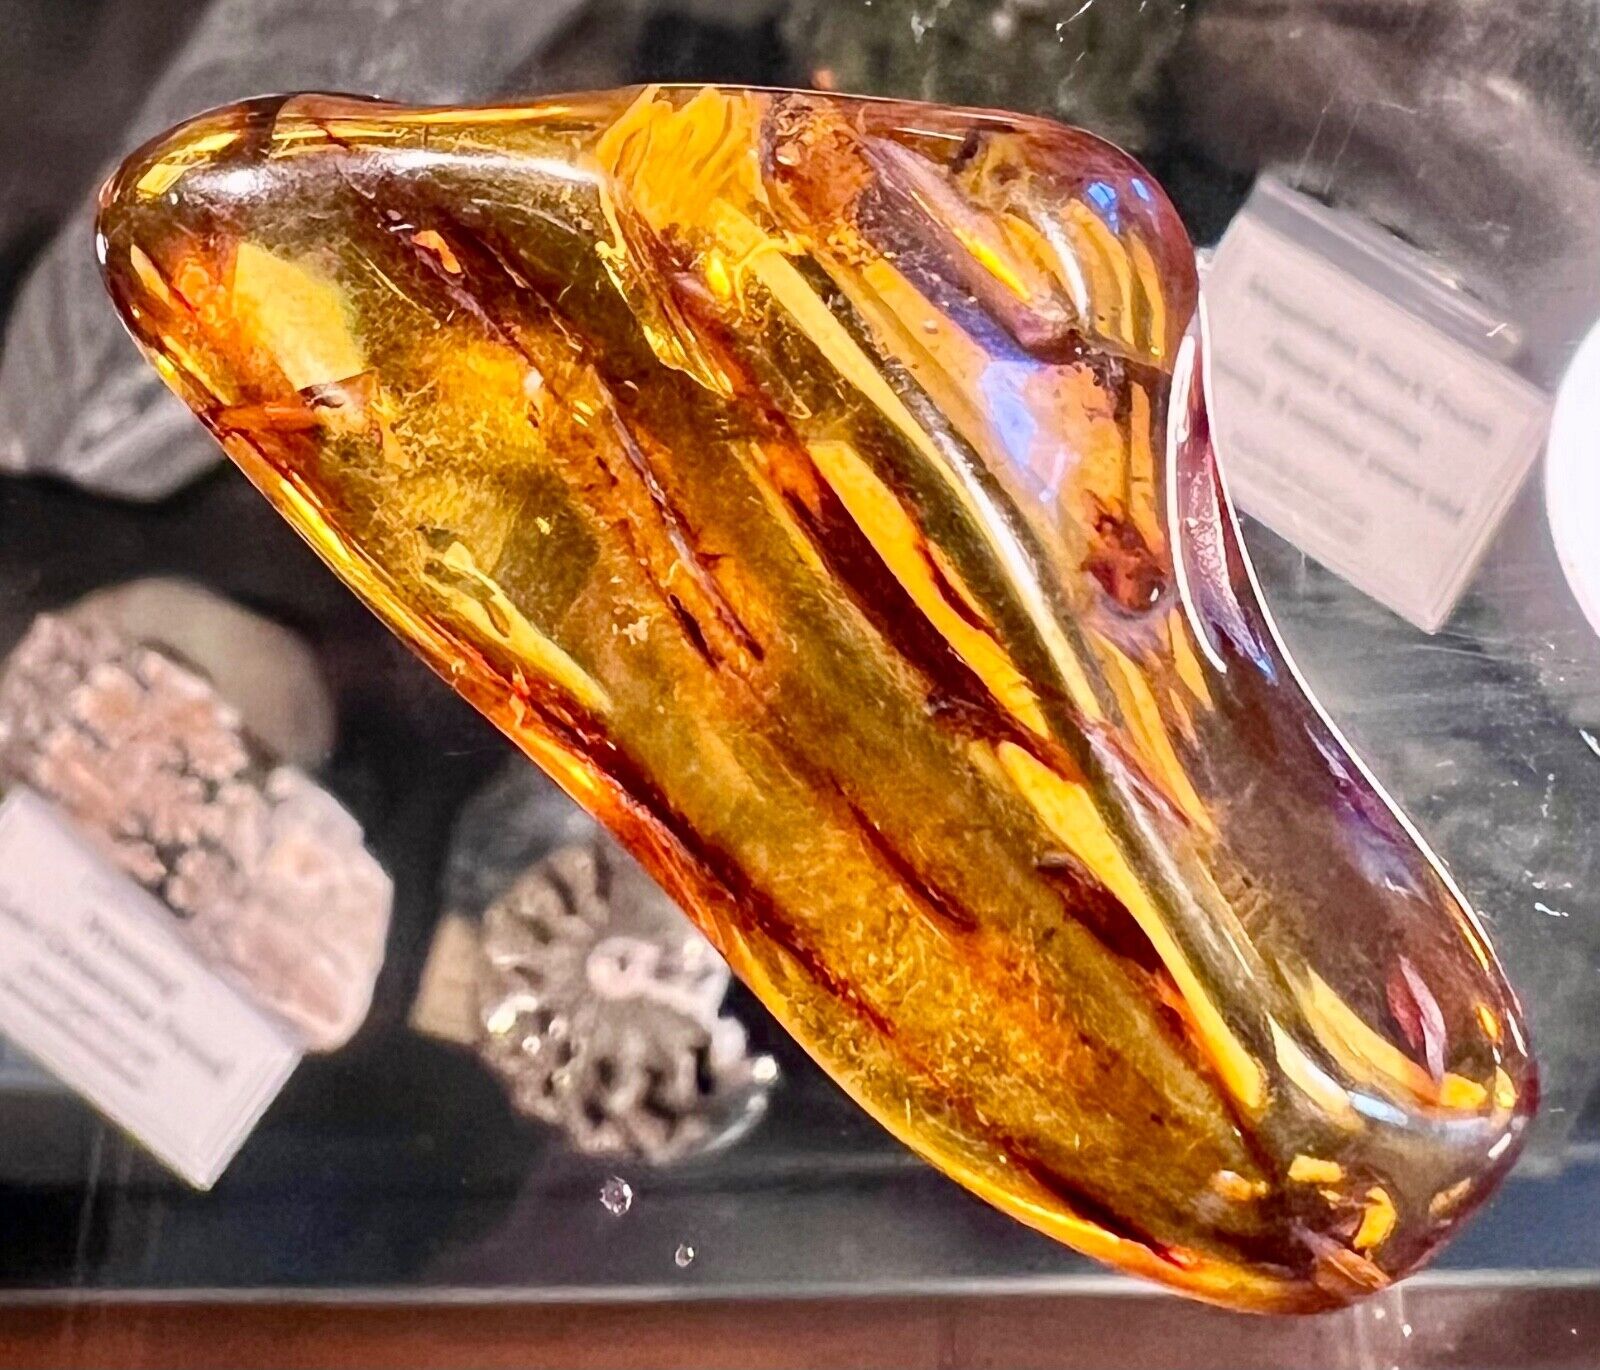 Baltic Amber polished freeform 9g Natural UV reactive fossilized tree resin.